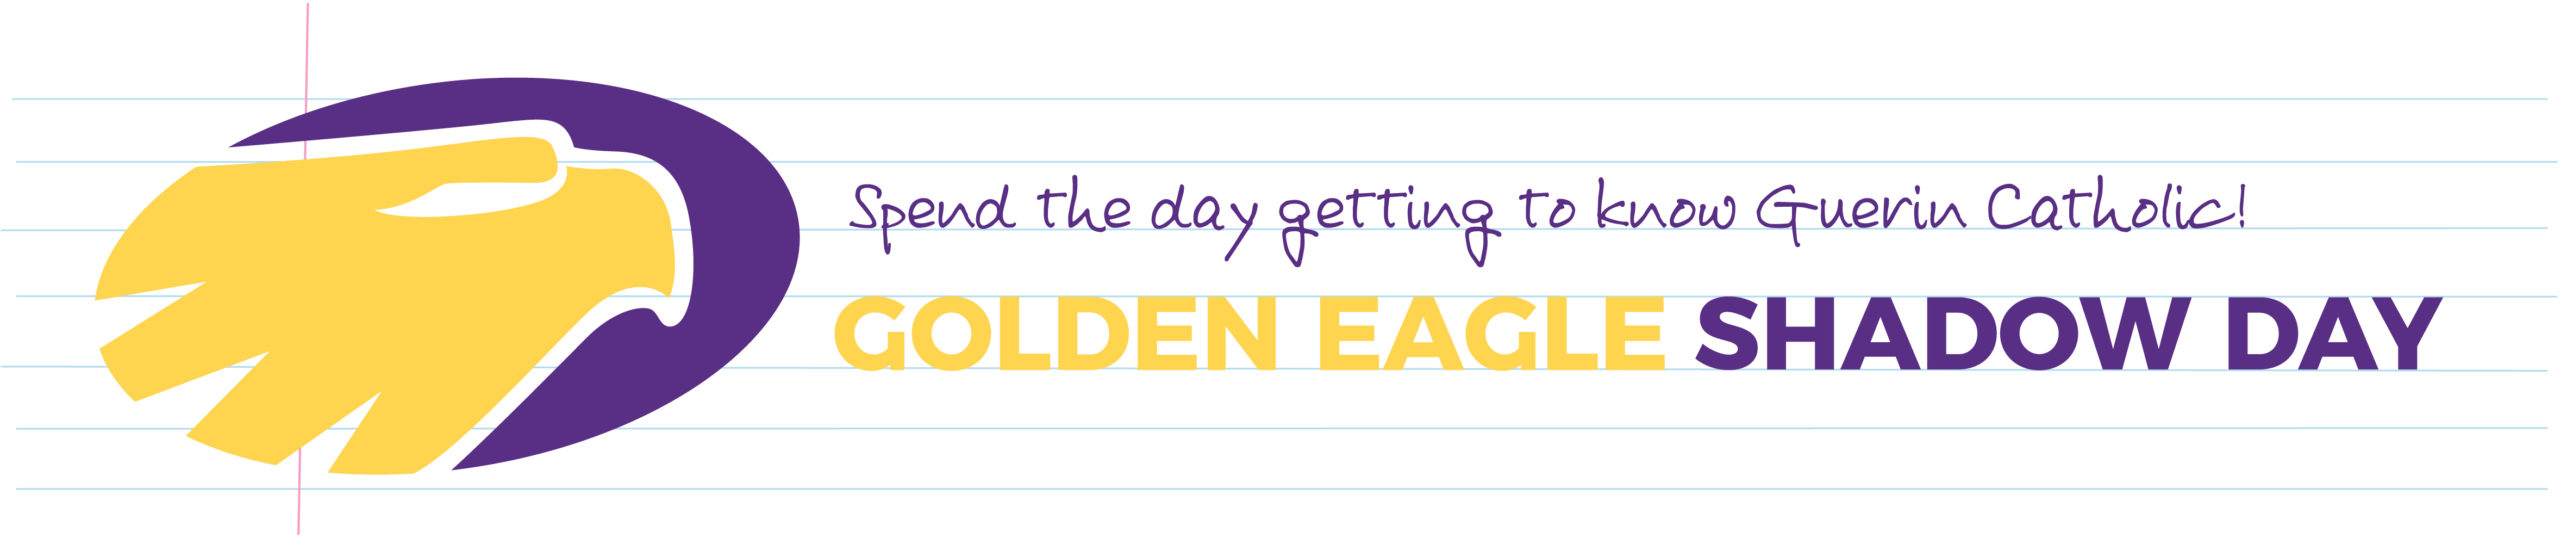 Golden Eagle Shadow Day